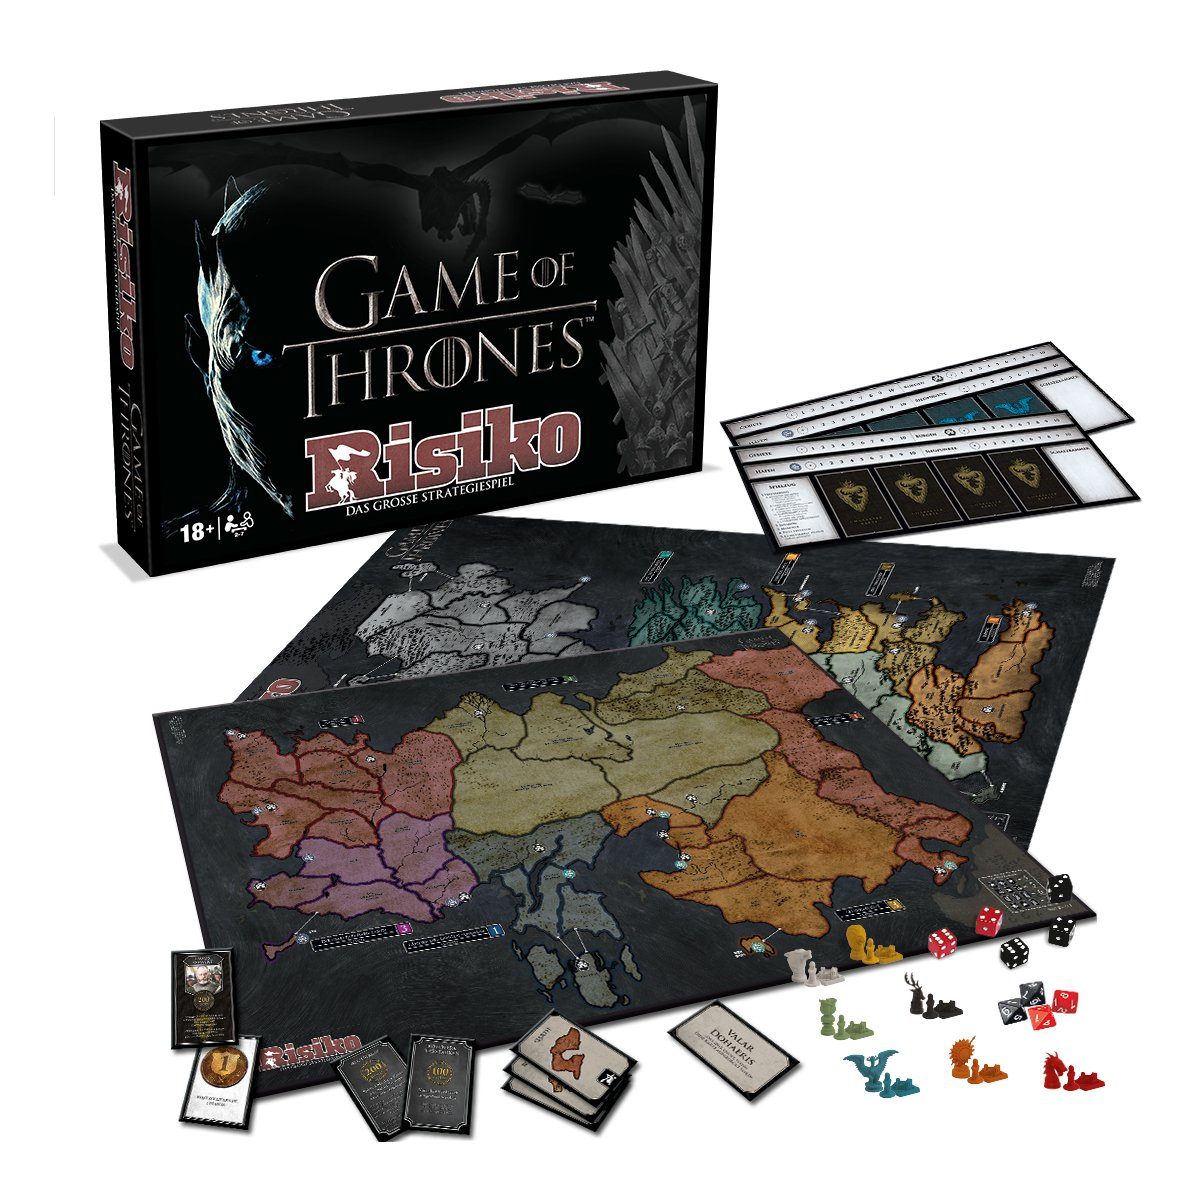 Winning Moves Brettspiel of Risiko Spiel, (Collectors Edition) Game Thrones 